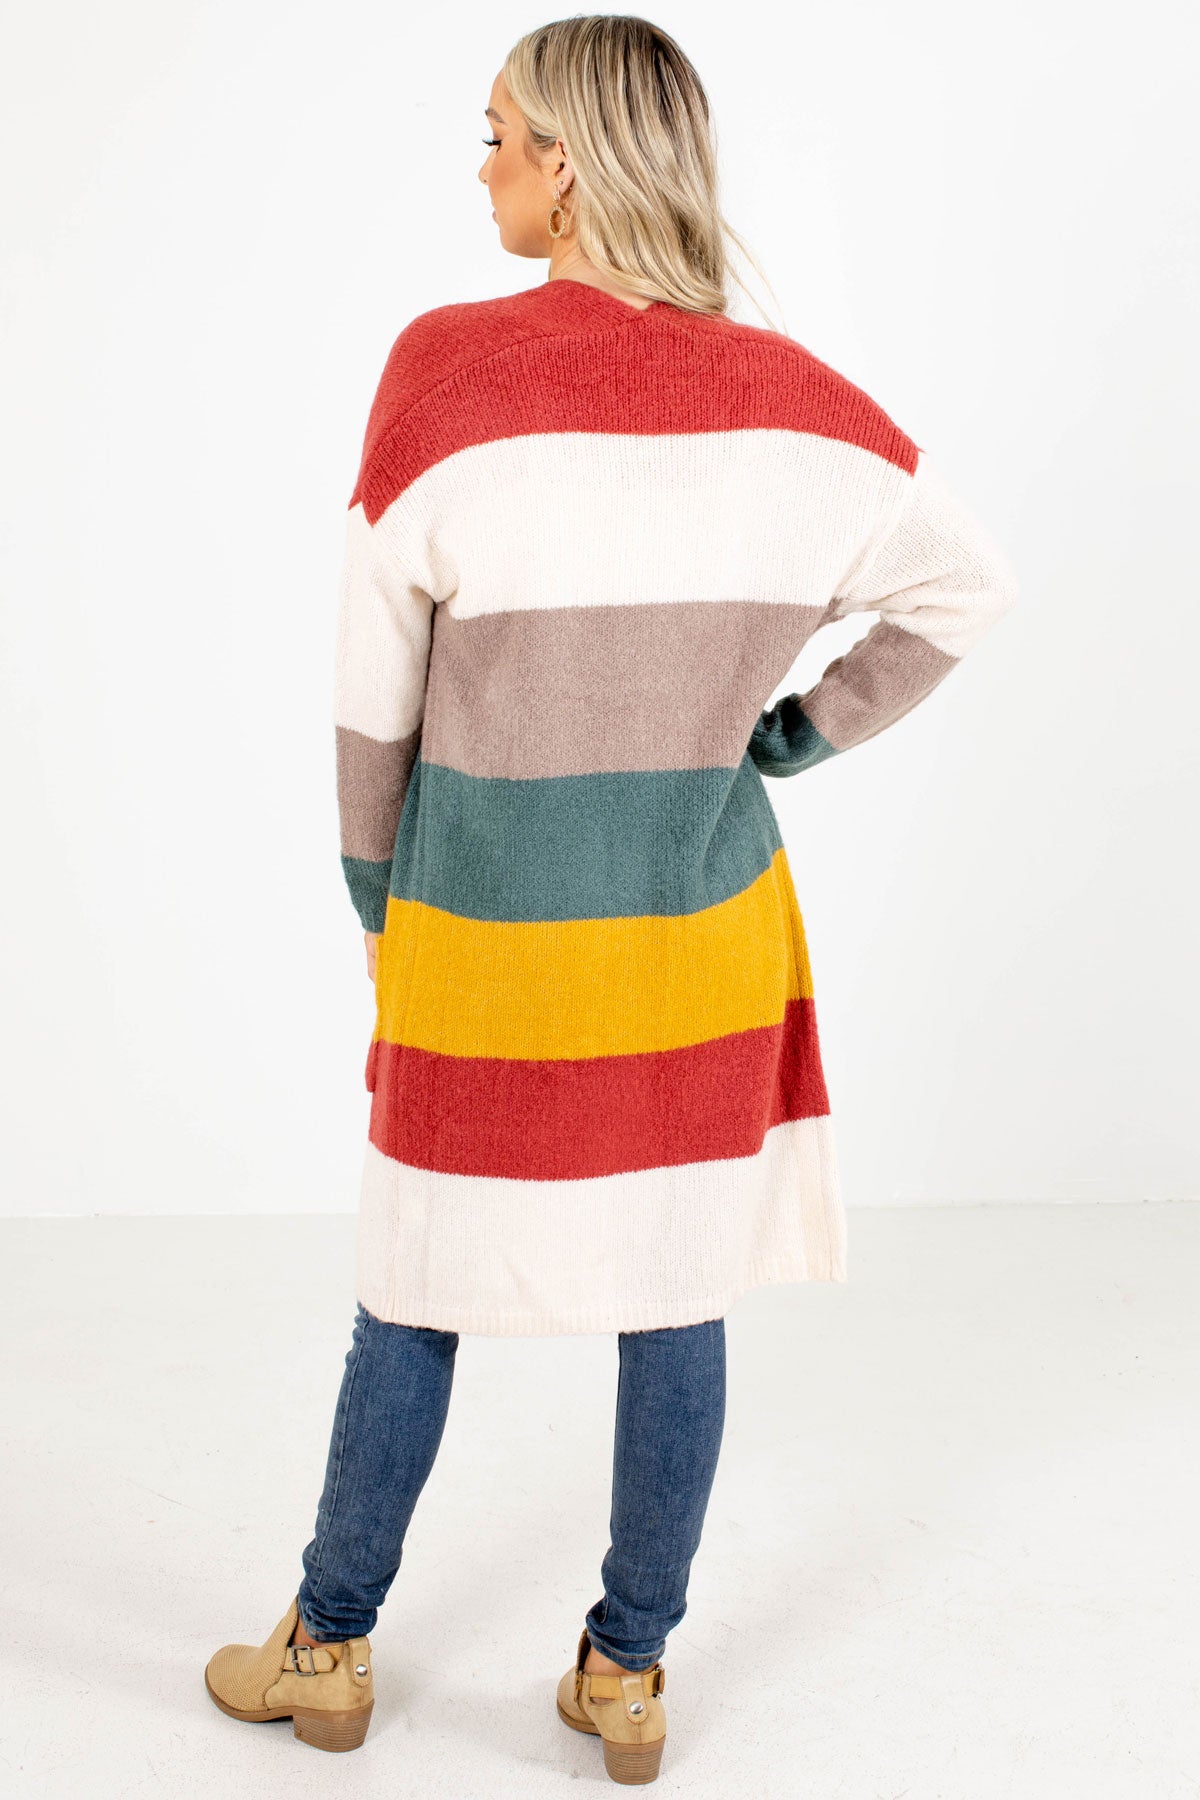 White, Red, Yellow, and Cream Striped Cardigan